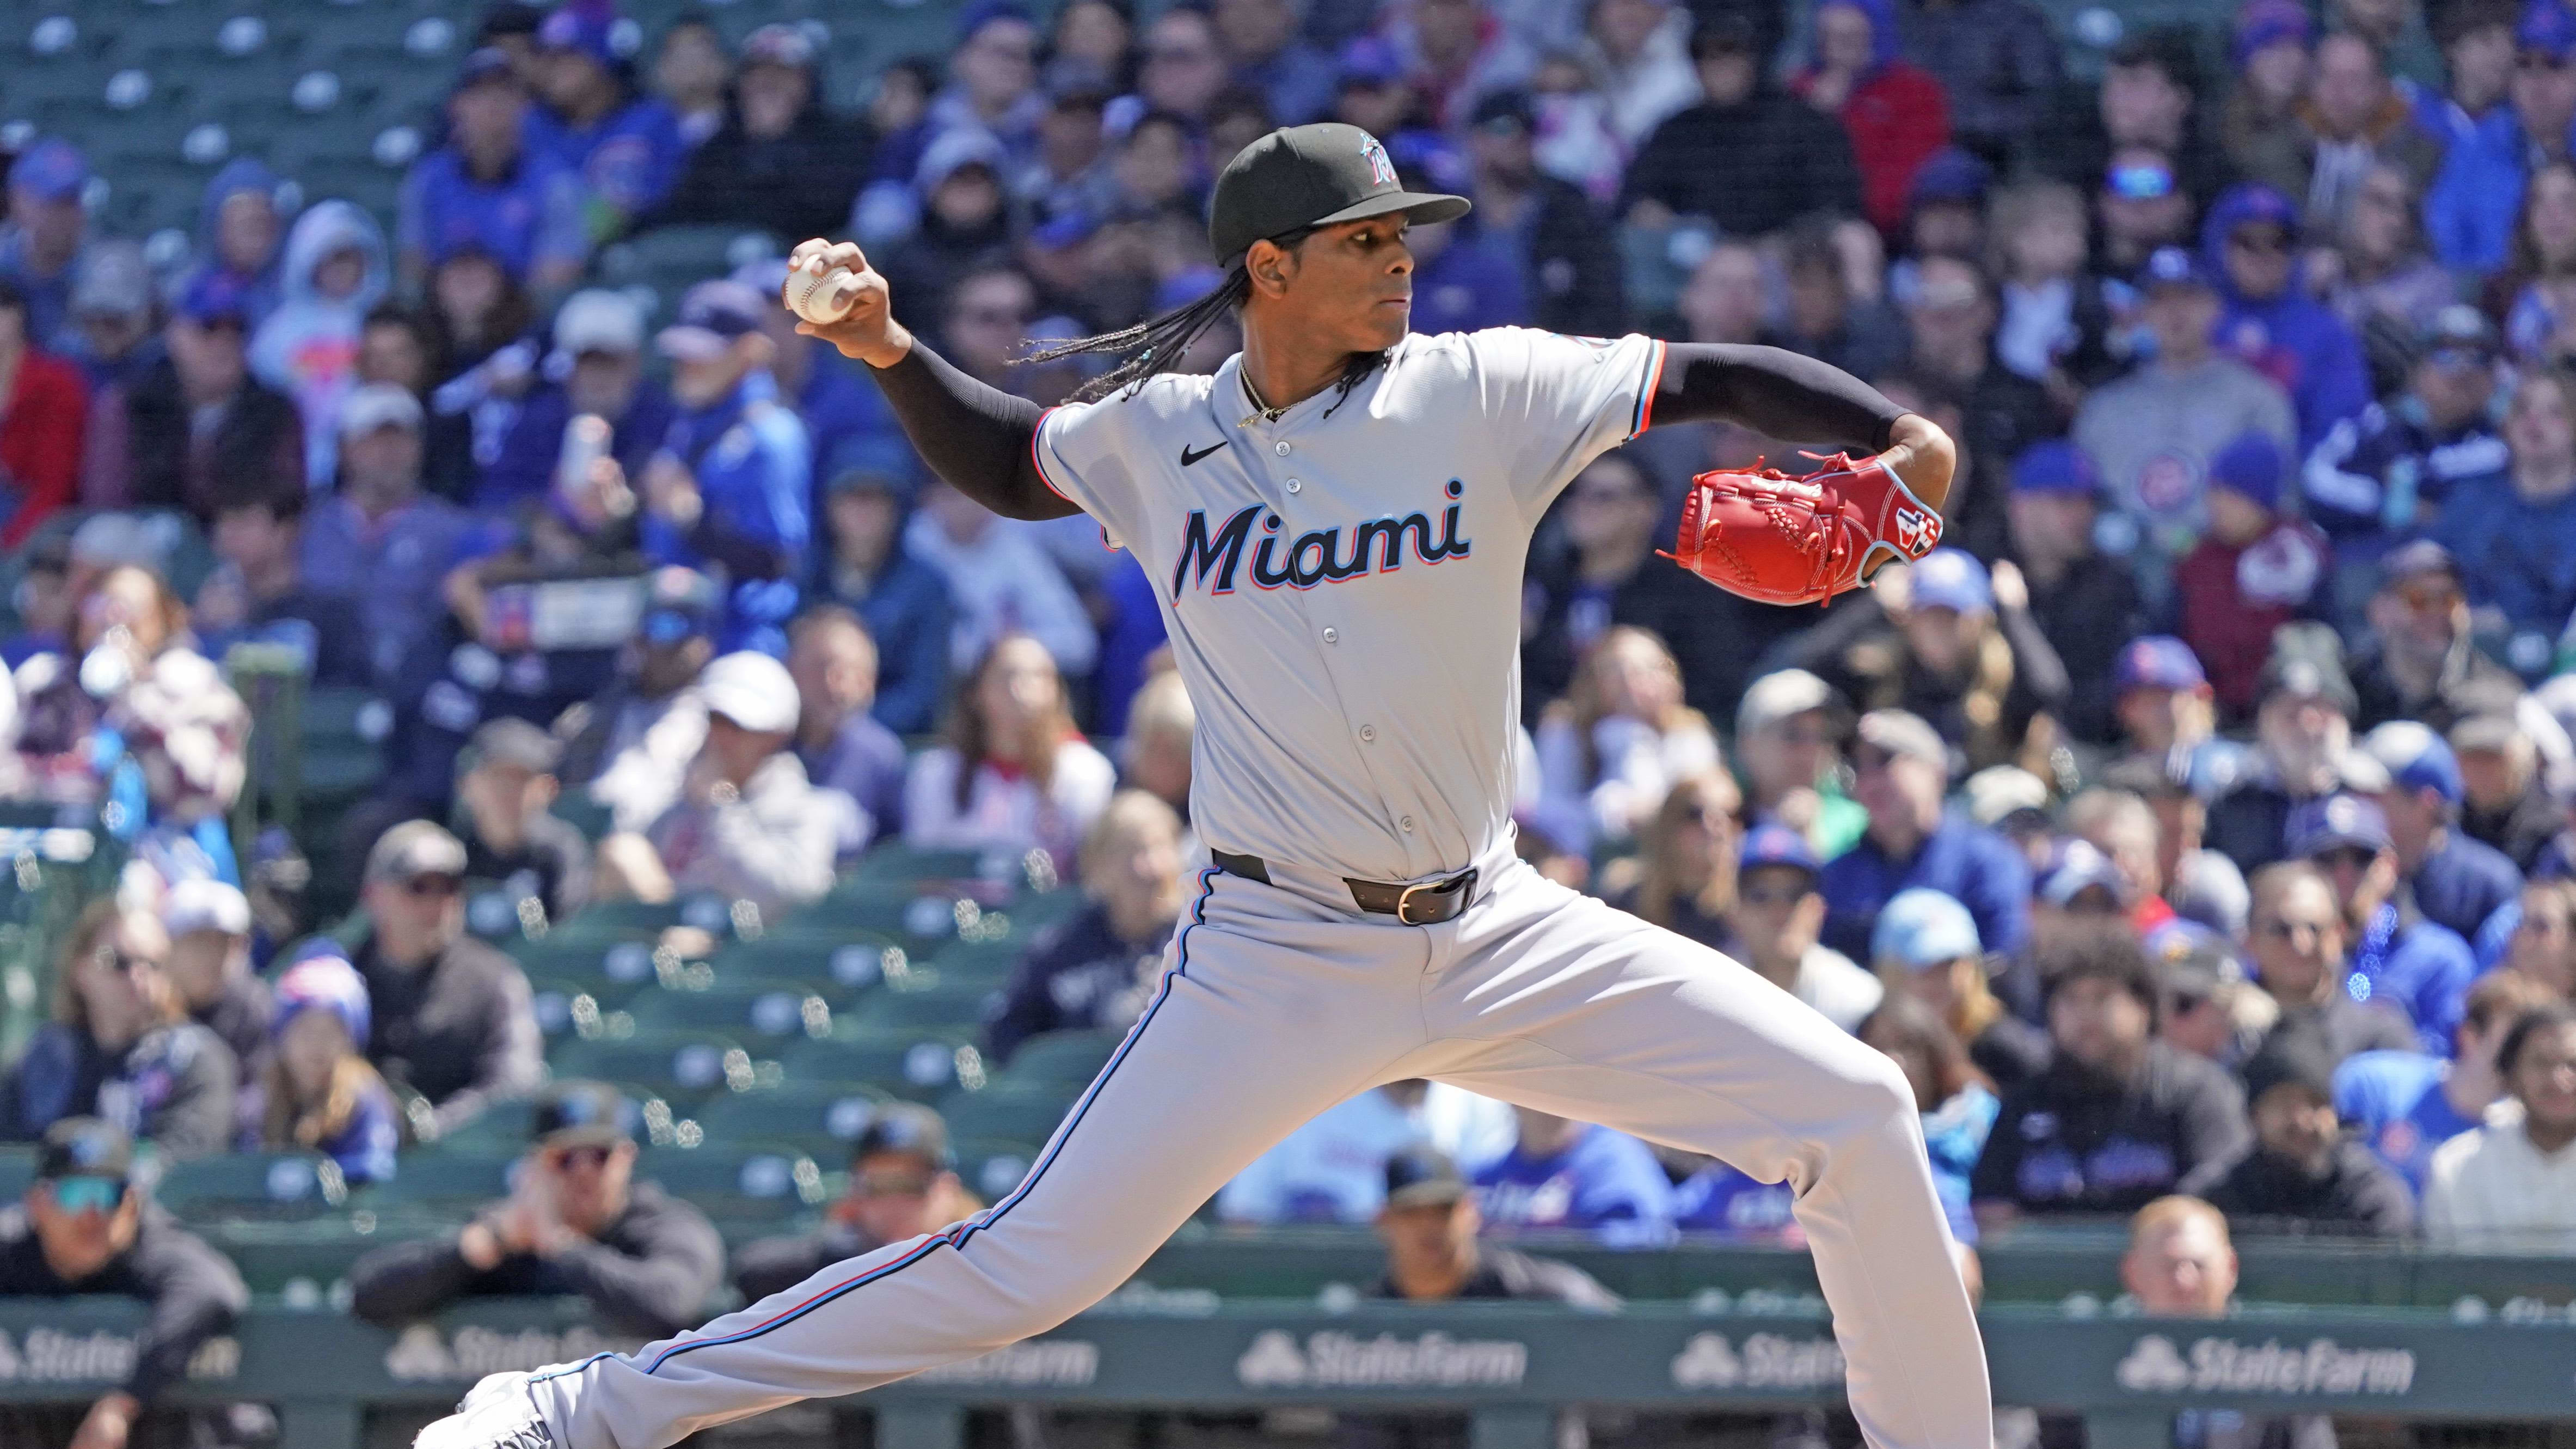 Marlins Send Edward Cabrera to Mound with Chance to Sweep Series